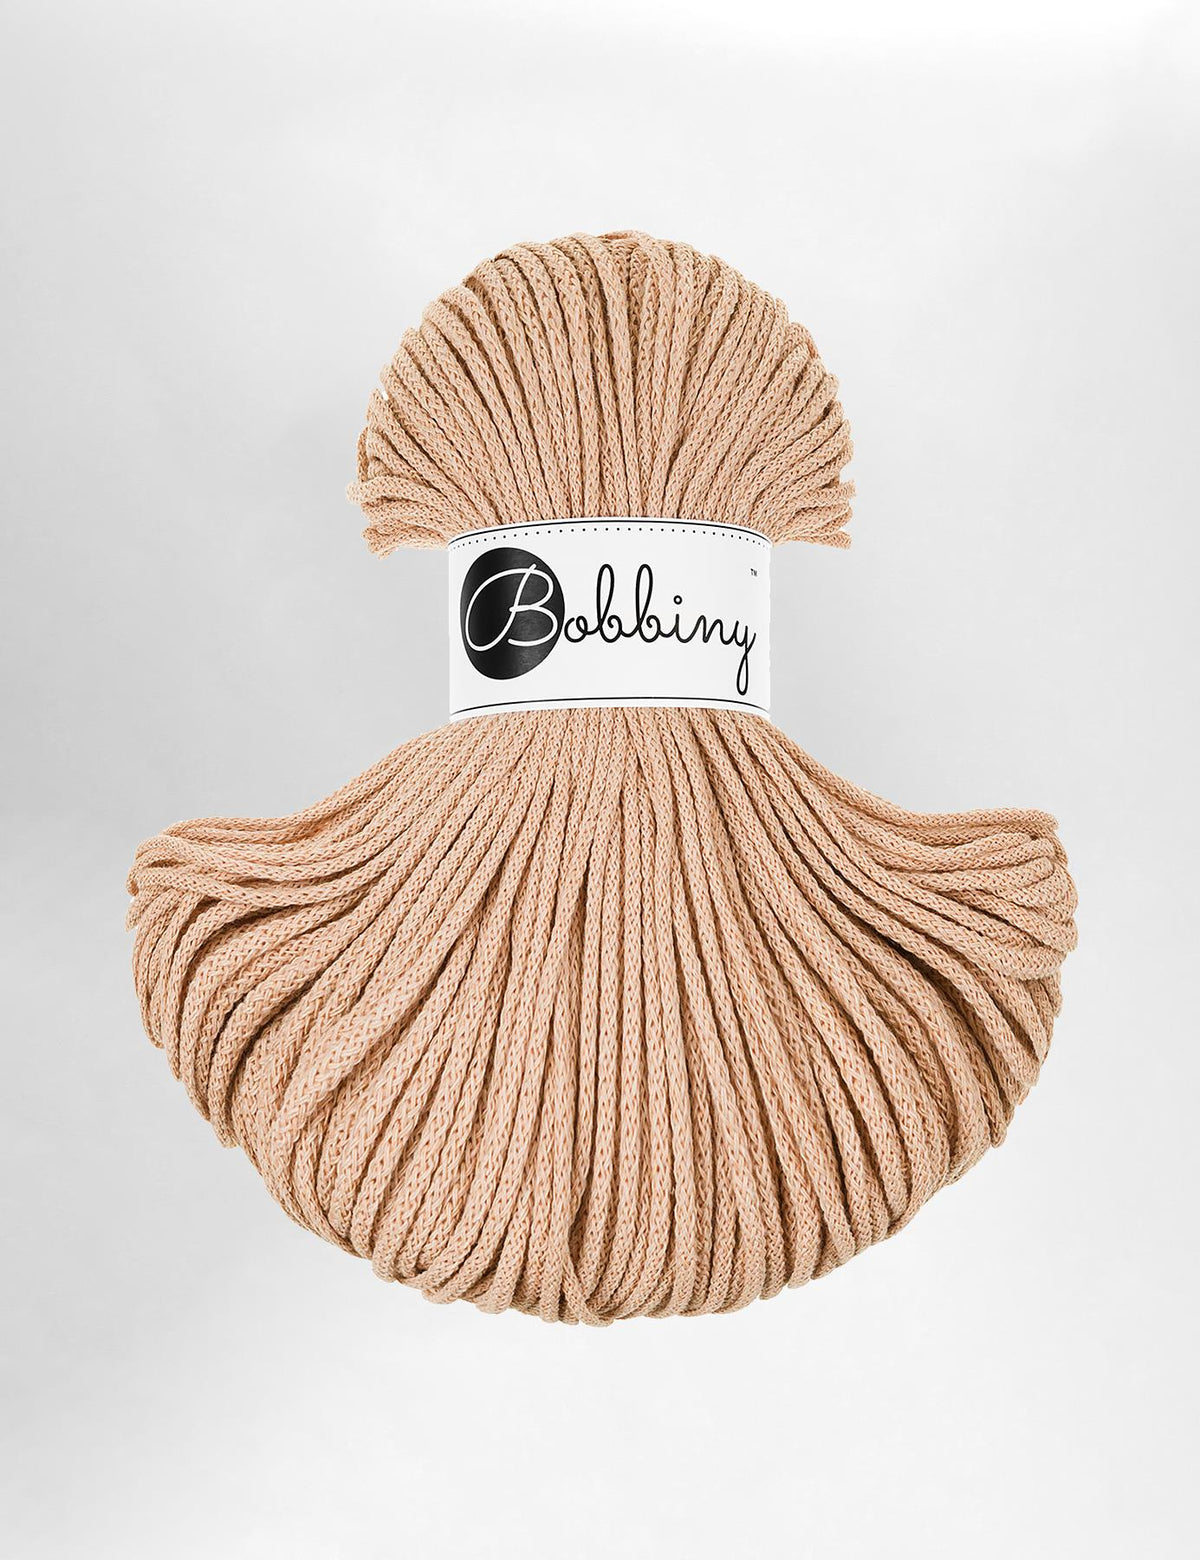 3mm Biscuit recycled cotton macrame cord by Bobbiny (100m)